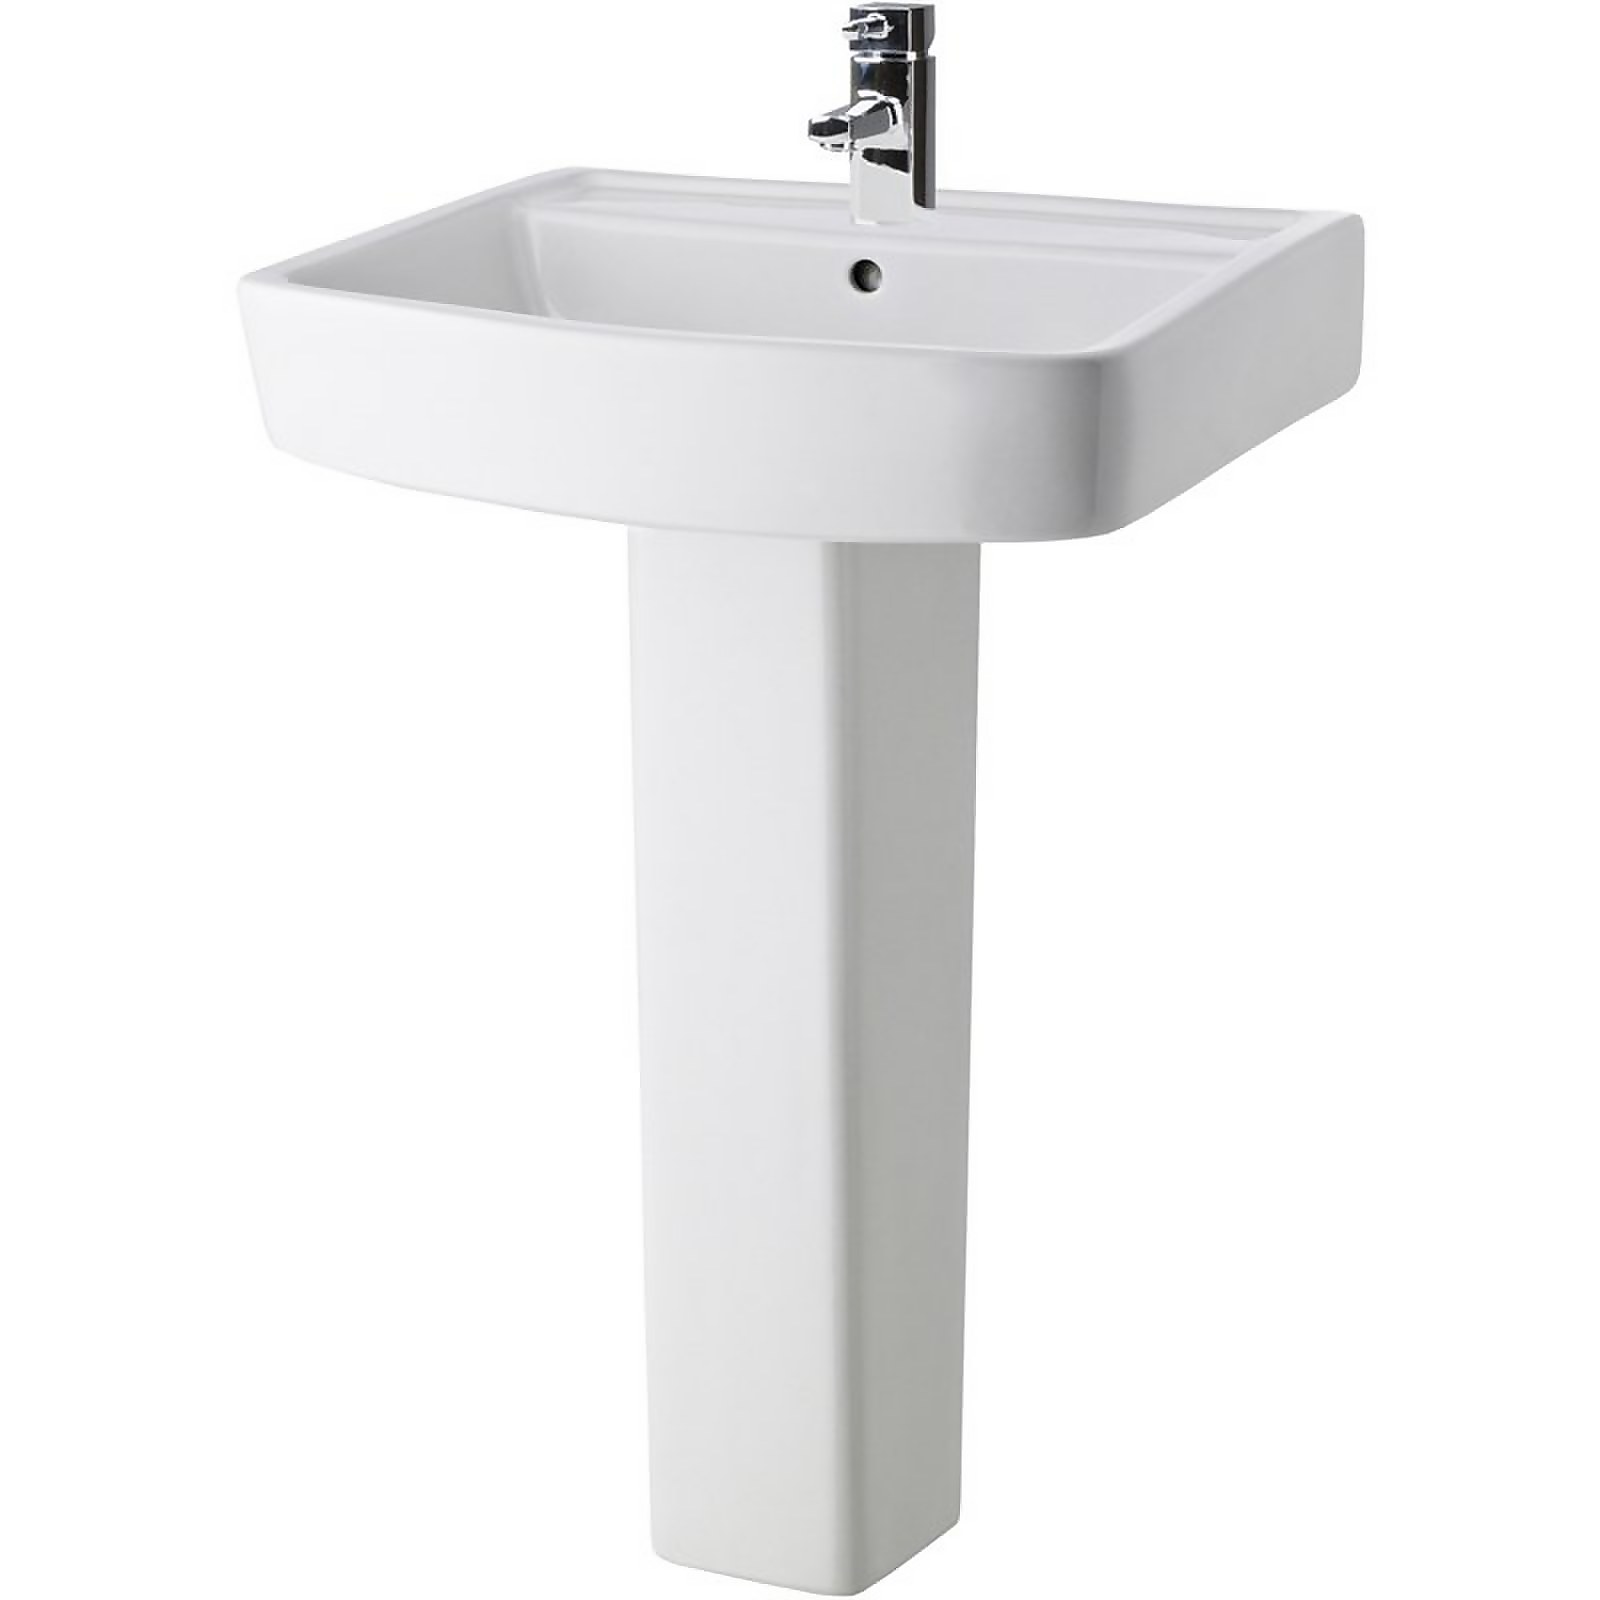 Photo of Balterley Optic 1 Tap Hole Basin And Full Pedestal - 600mm